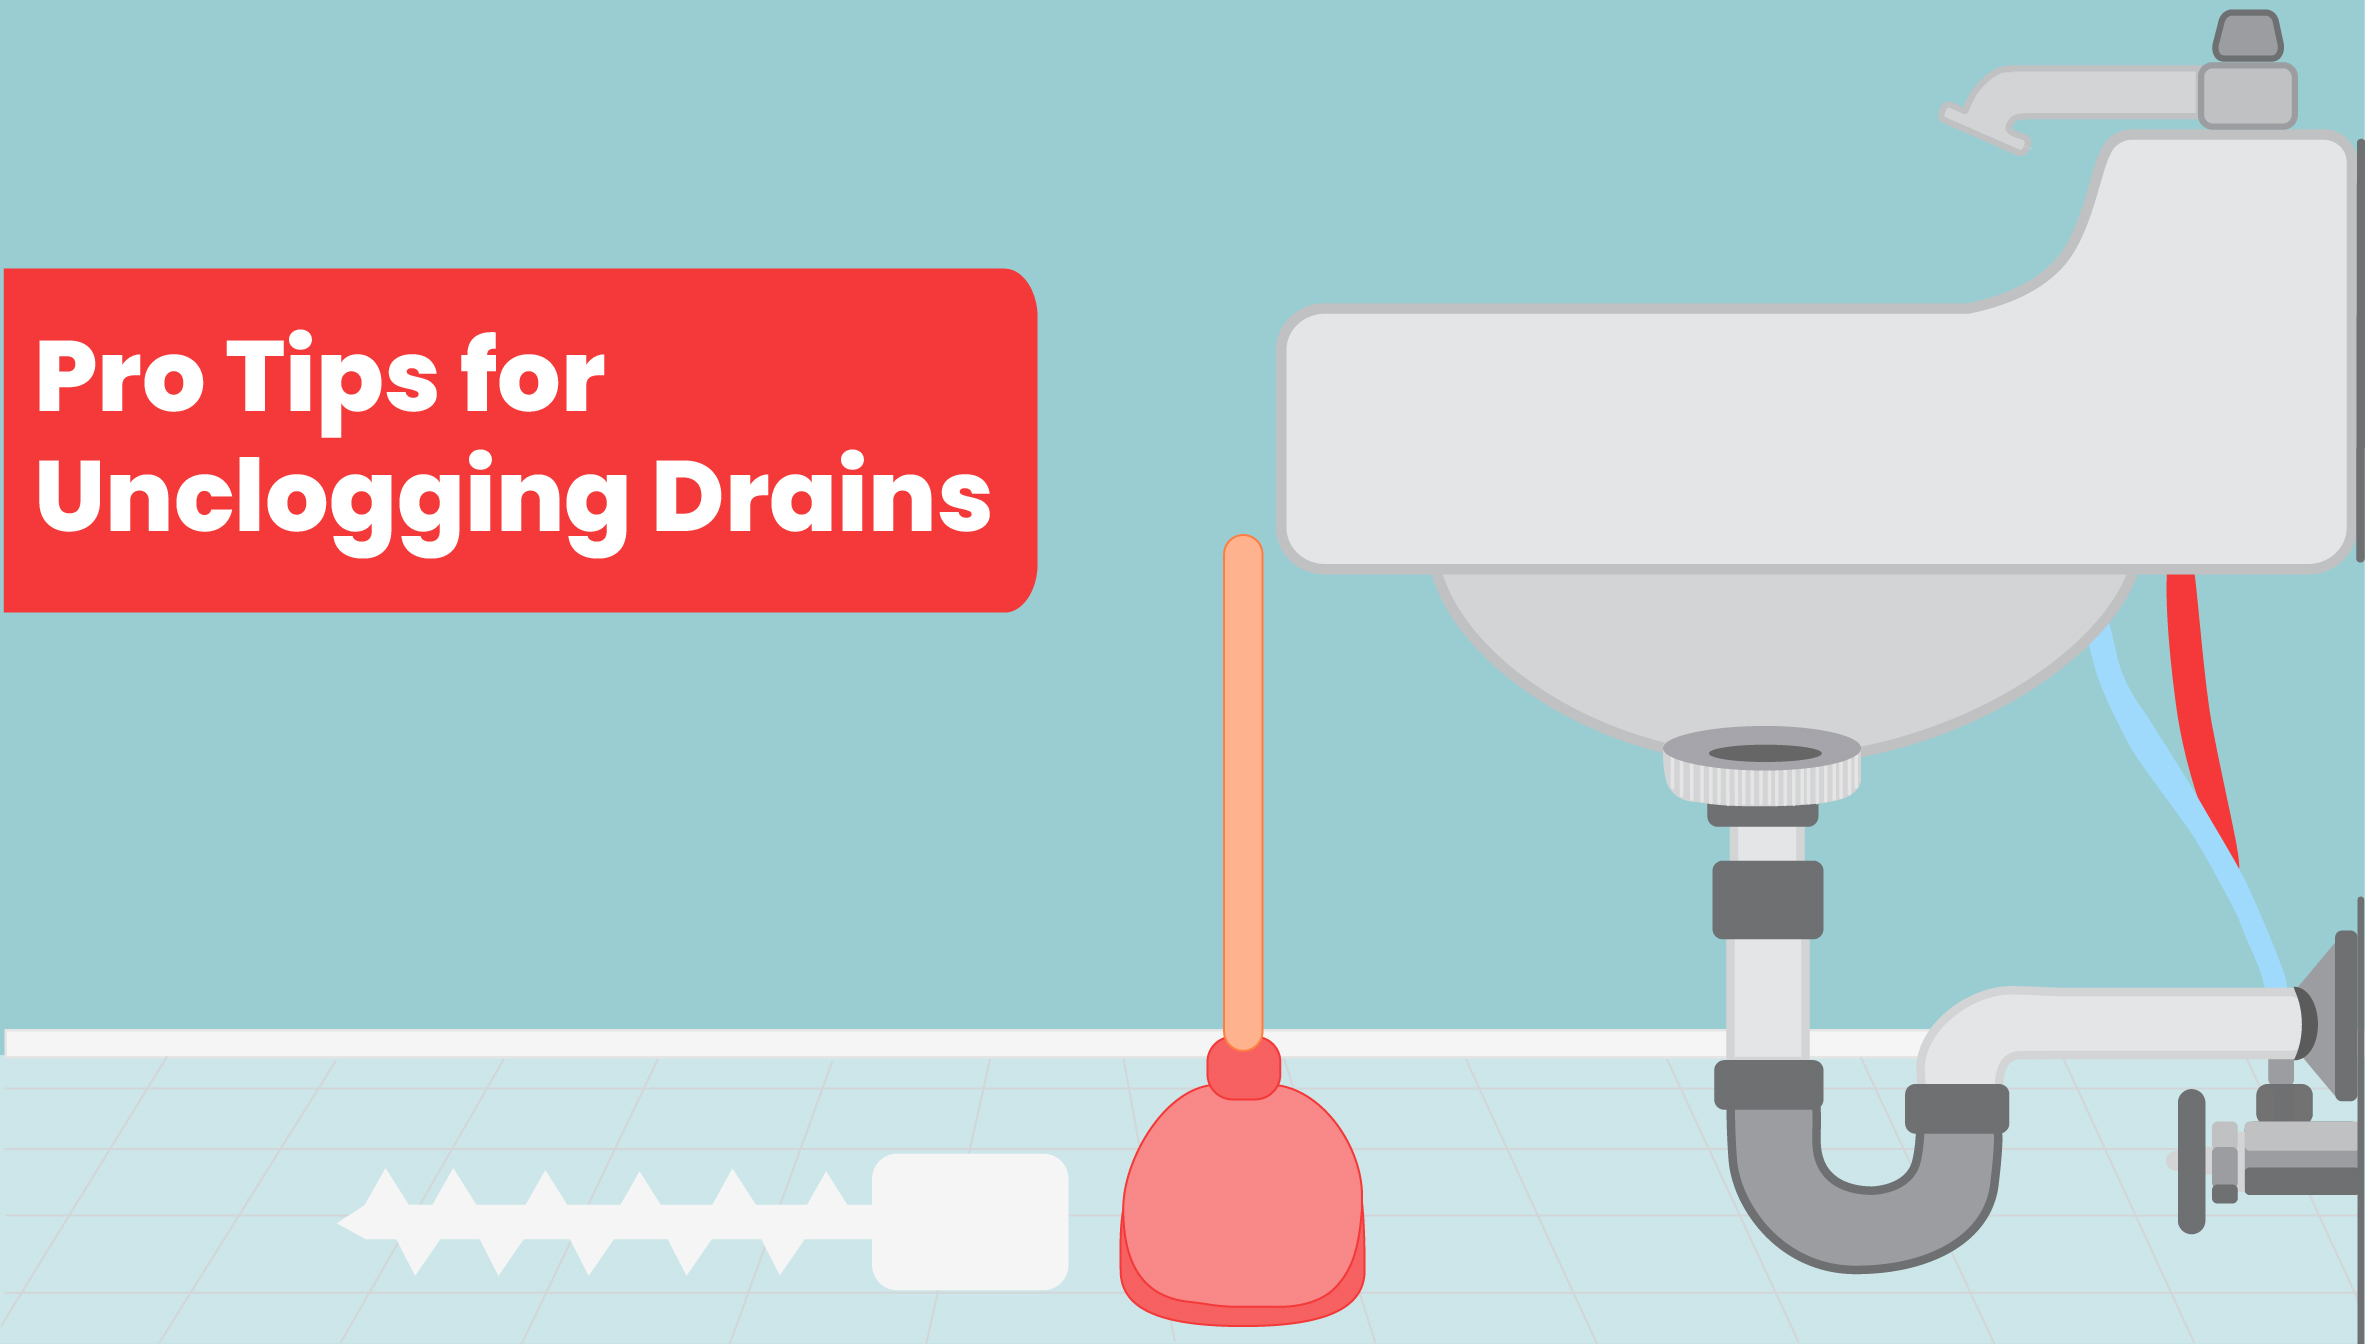 6 Ways to Fix Clogged Drains & Keep Pipes Flowing Freely